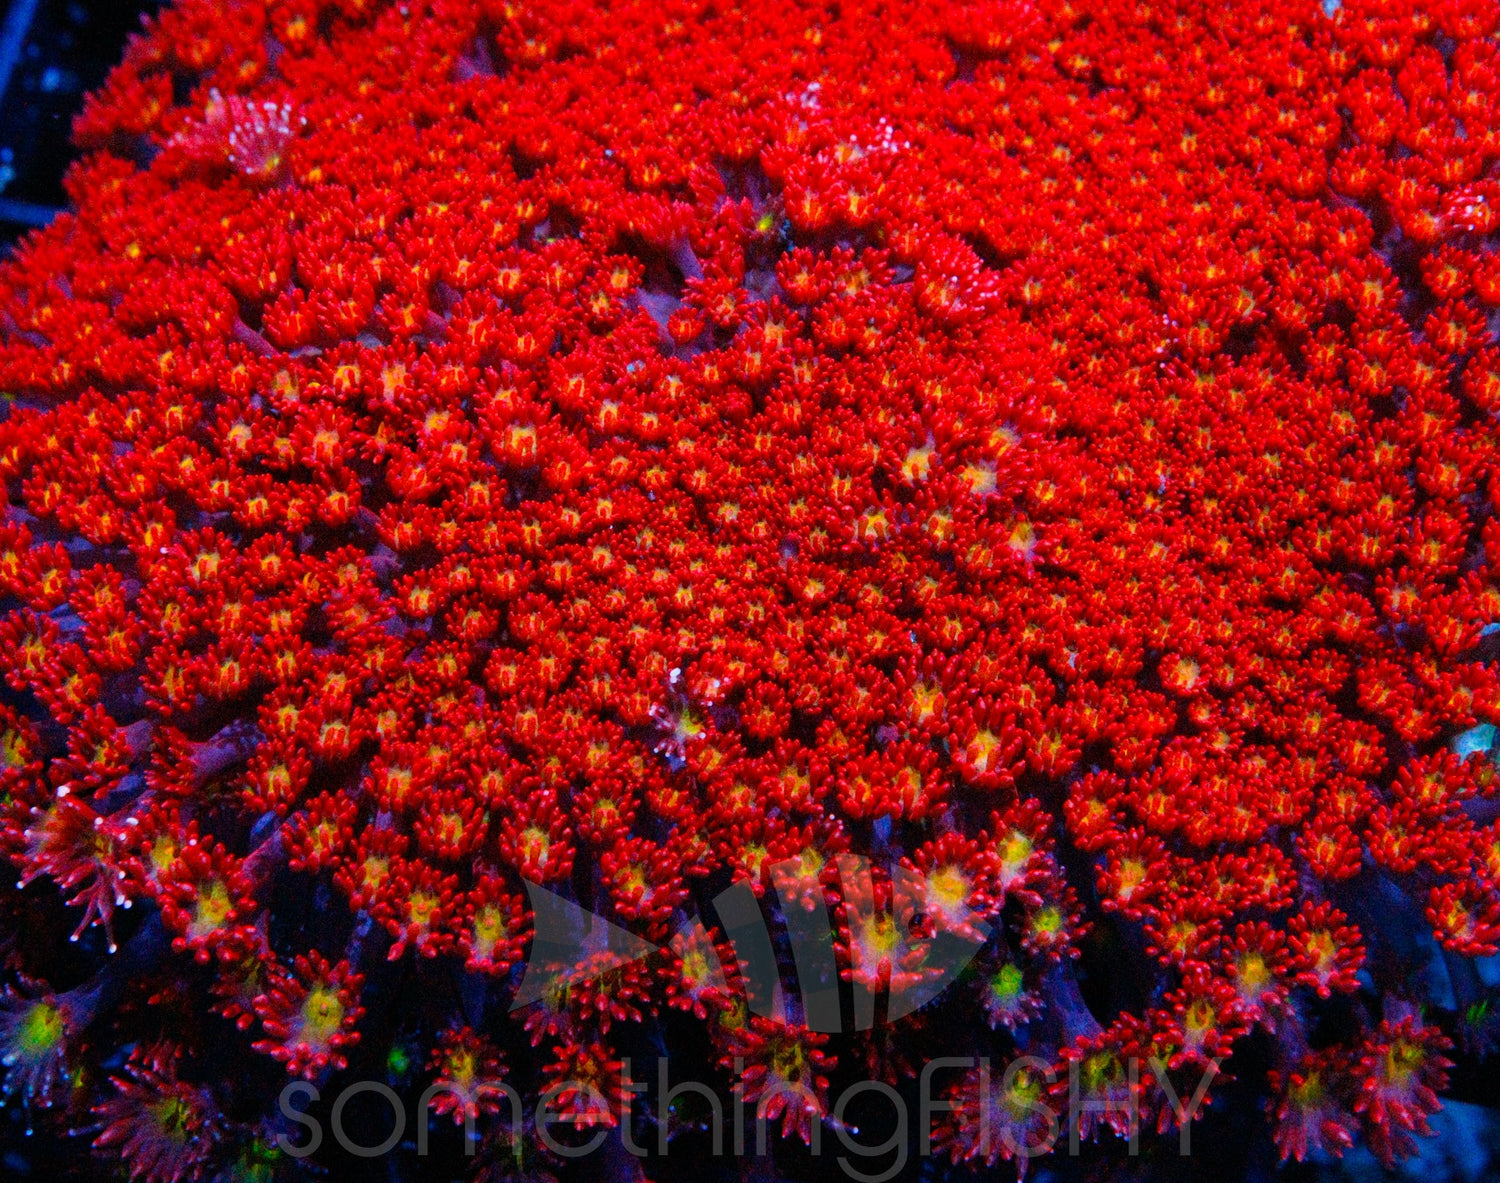 Red/Yellow Center Short Polyp Goni